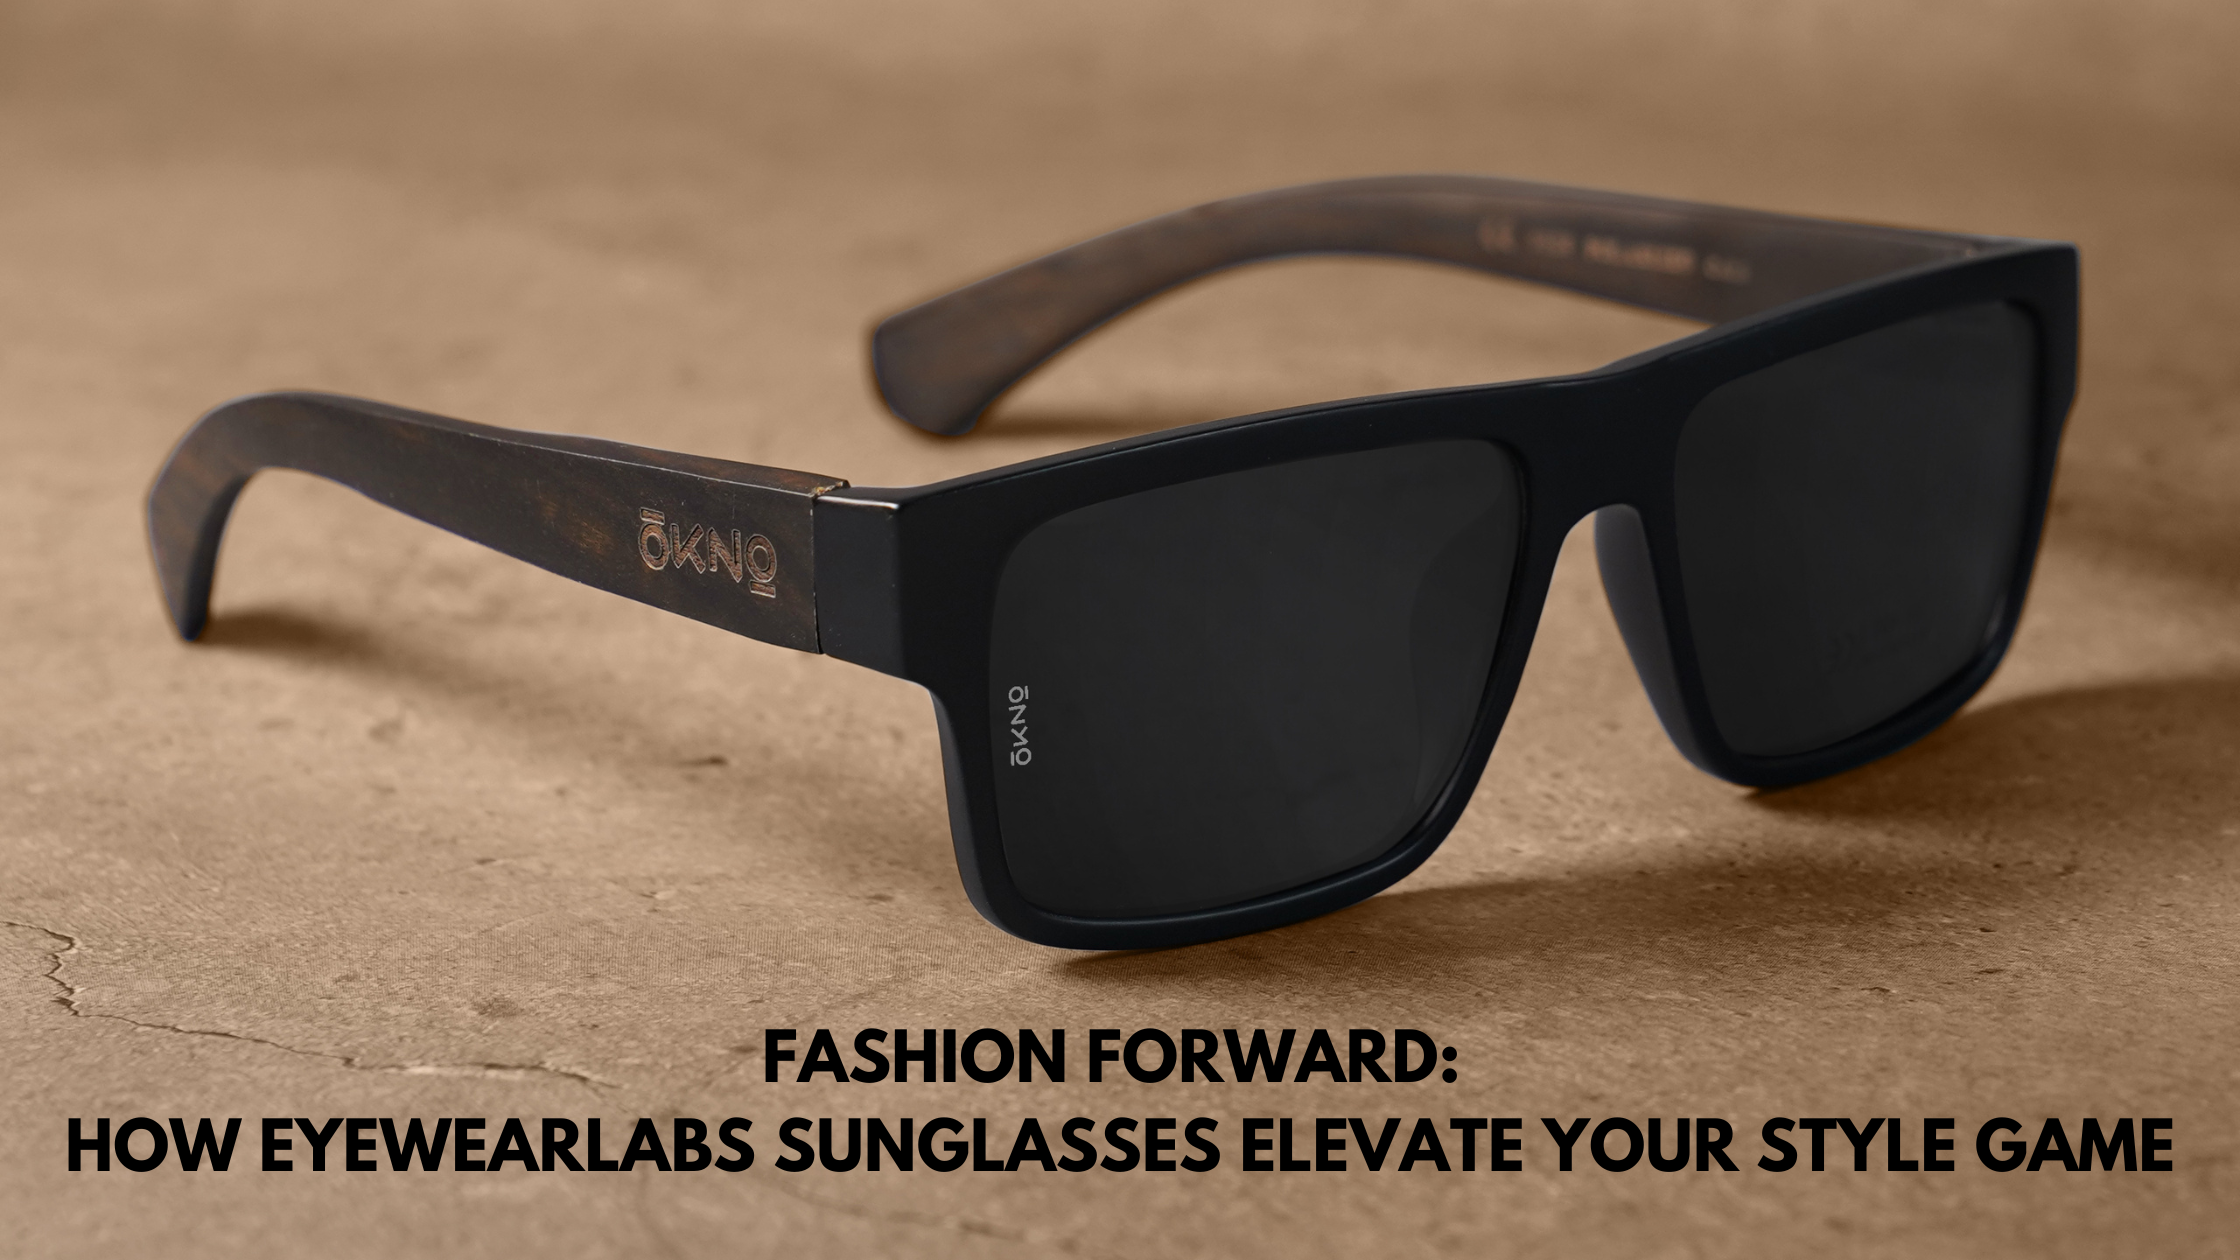 Fashion Forward: How Eyewearlabs Sunglasses Elevate Your Style Game